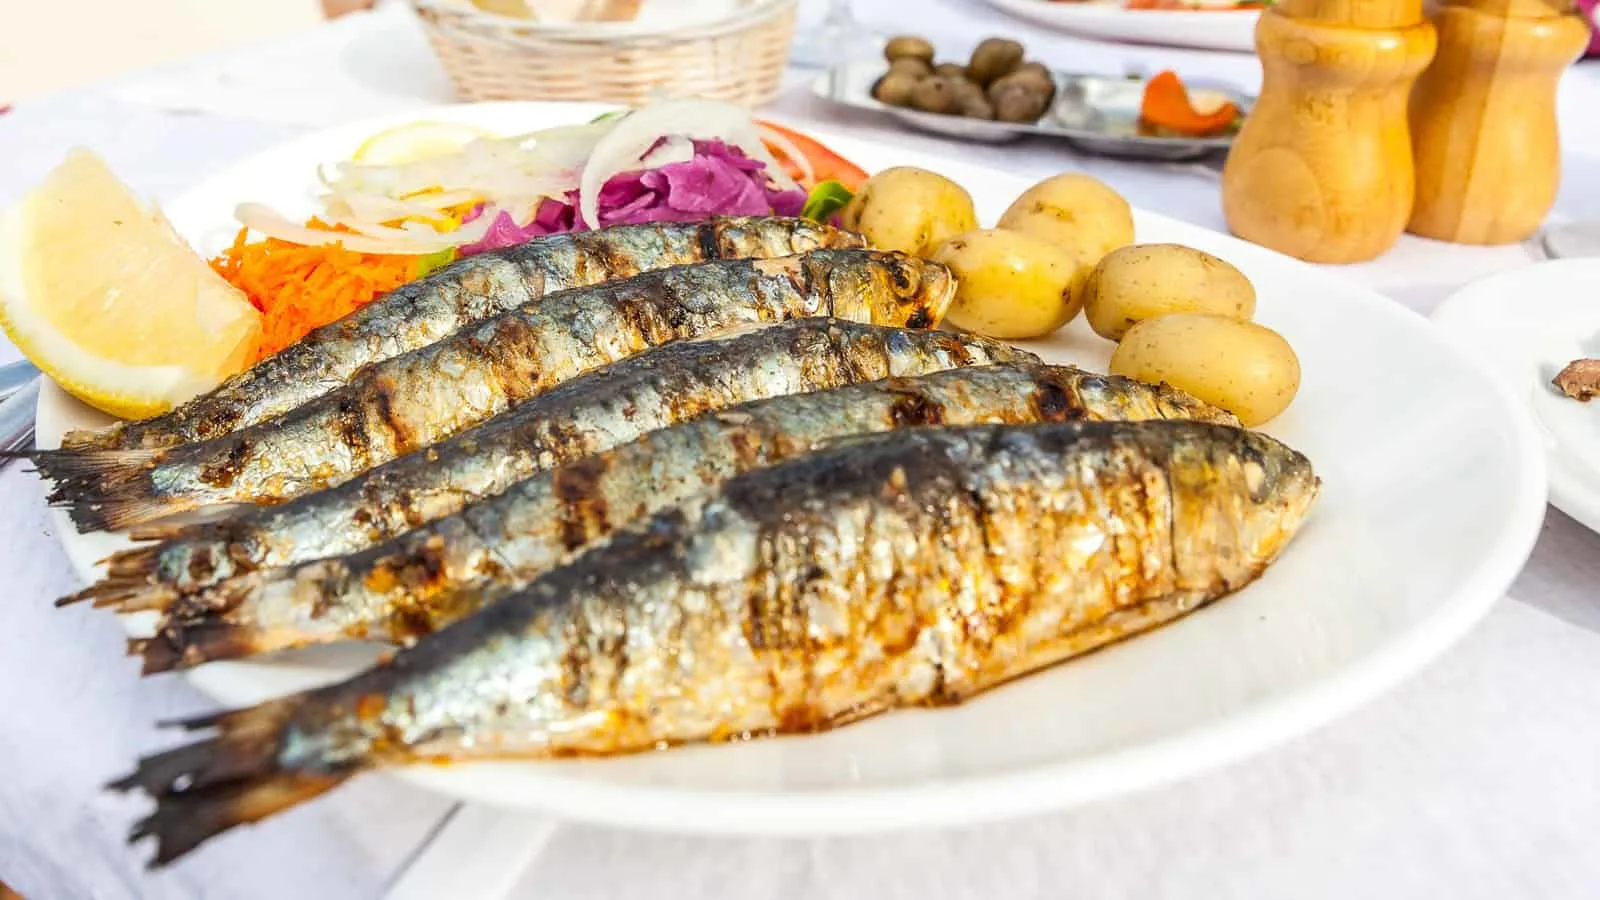 Portuguese food & drink is nothing if not fresh, simple and totally delicious. Use this guide for dining tips and food and drink you must try. #Food #Portugal Read the full article here: //mowgli-adventures.com/portuguese-food-drink/